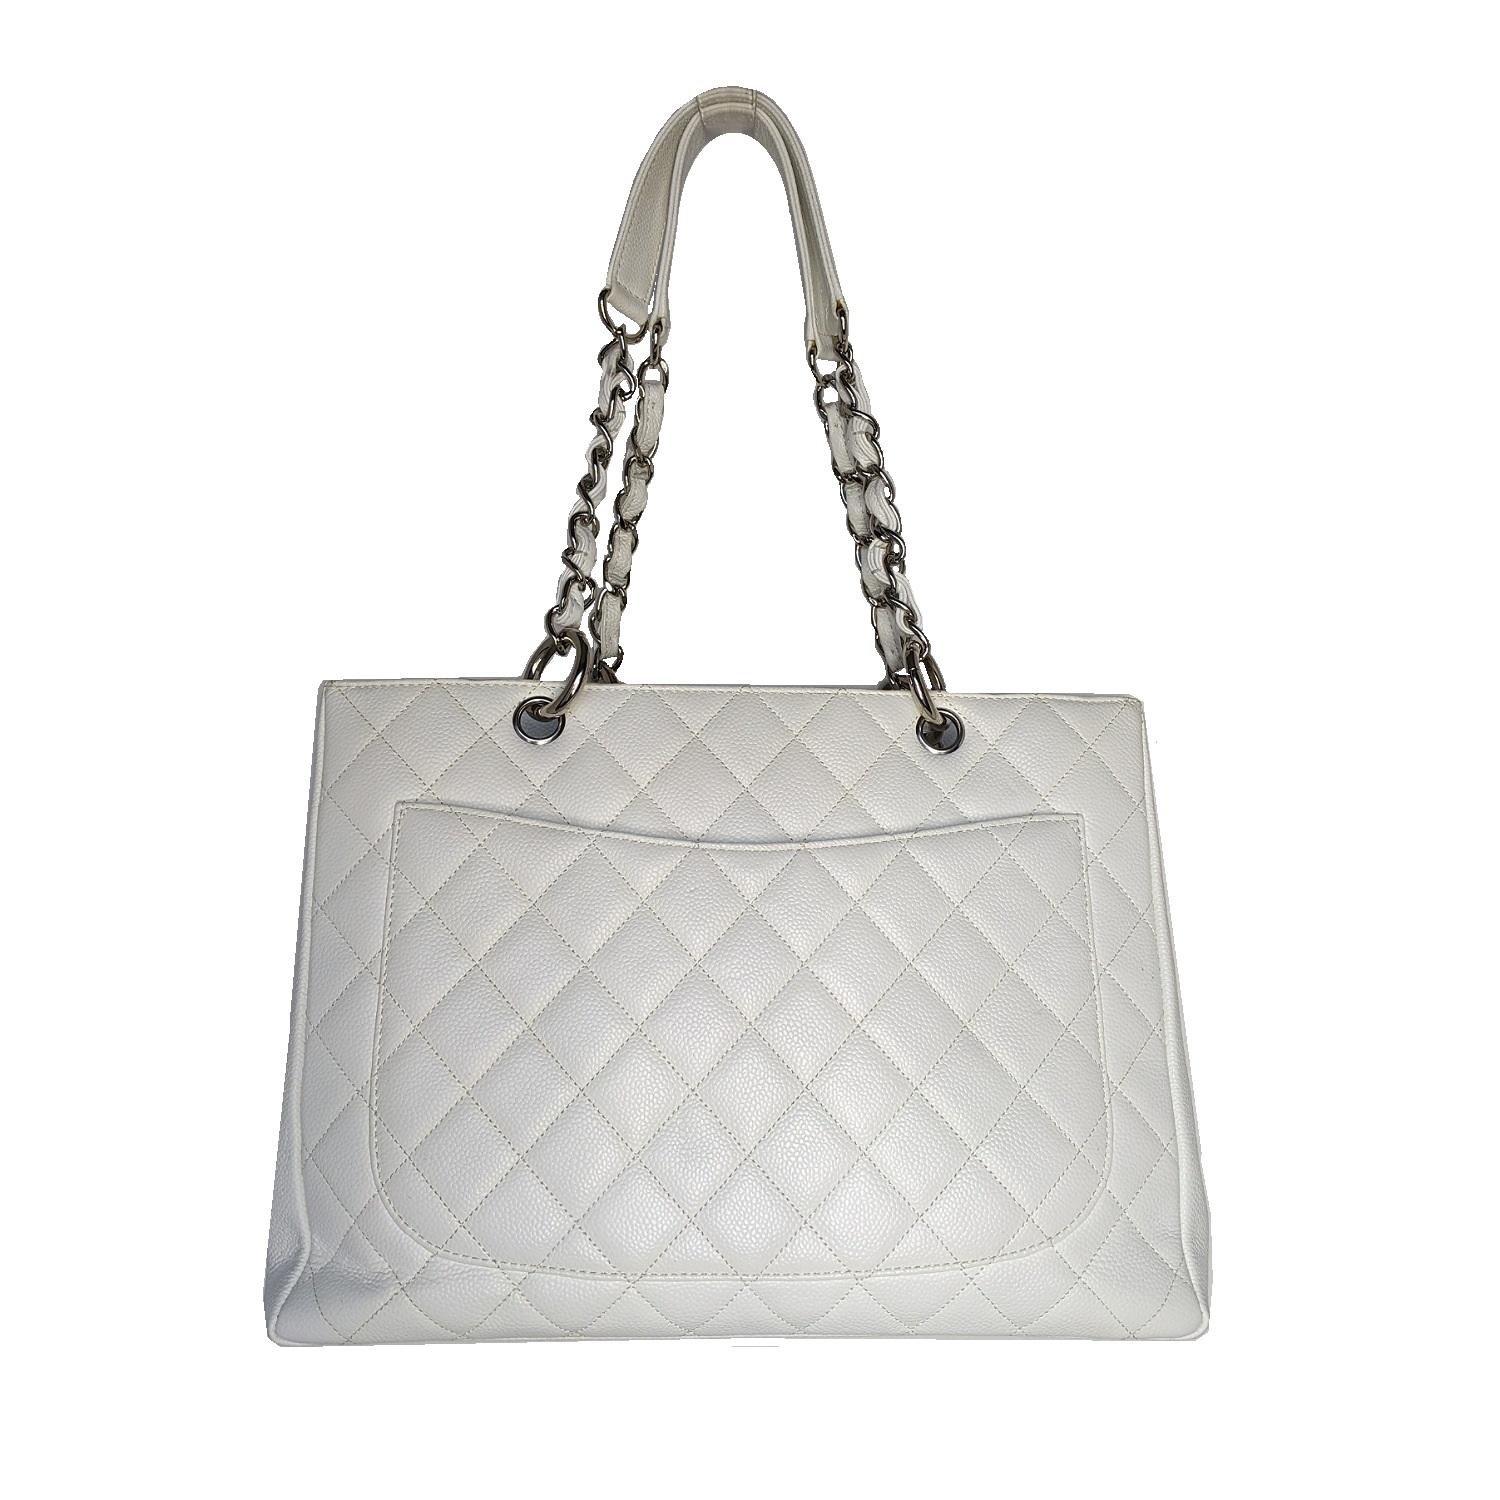 This stylish tote is crafted of diamond-quilted caviar leather in white. This shoulder bag features leather-threaded polished silver chain-link shoulder straps with shoulder pads, a quilted Chanel CC logo on the front, and a flat pocket on the rear.